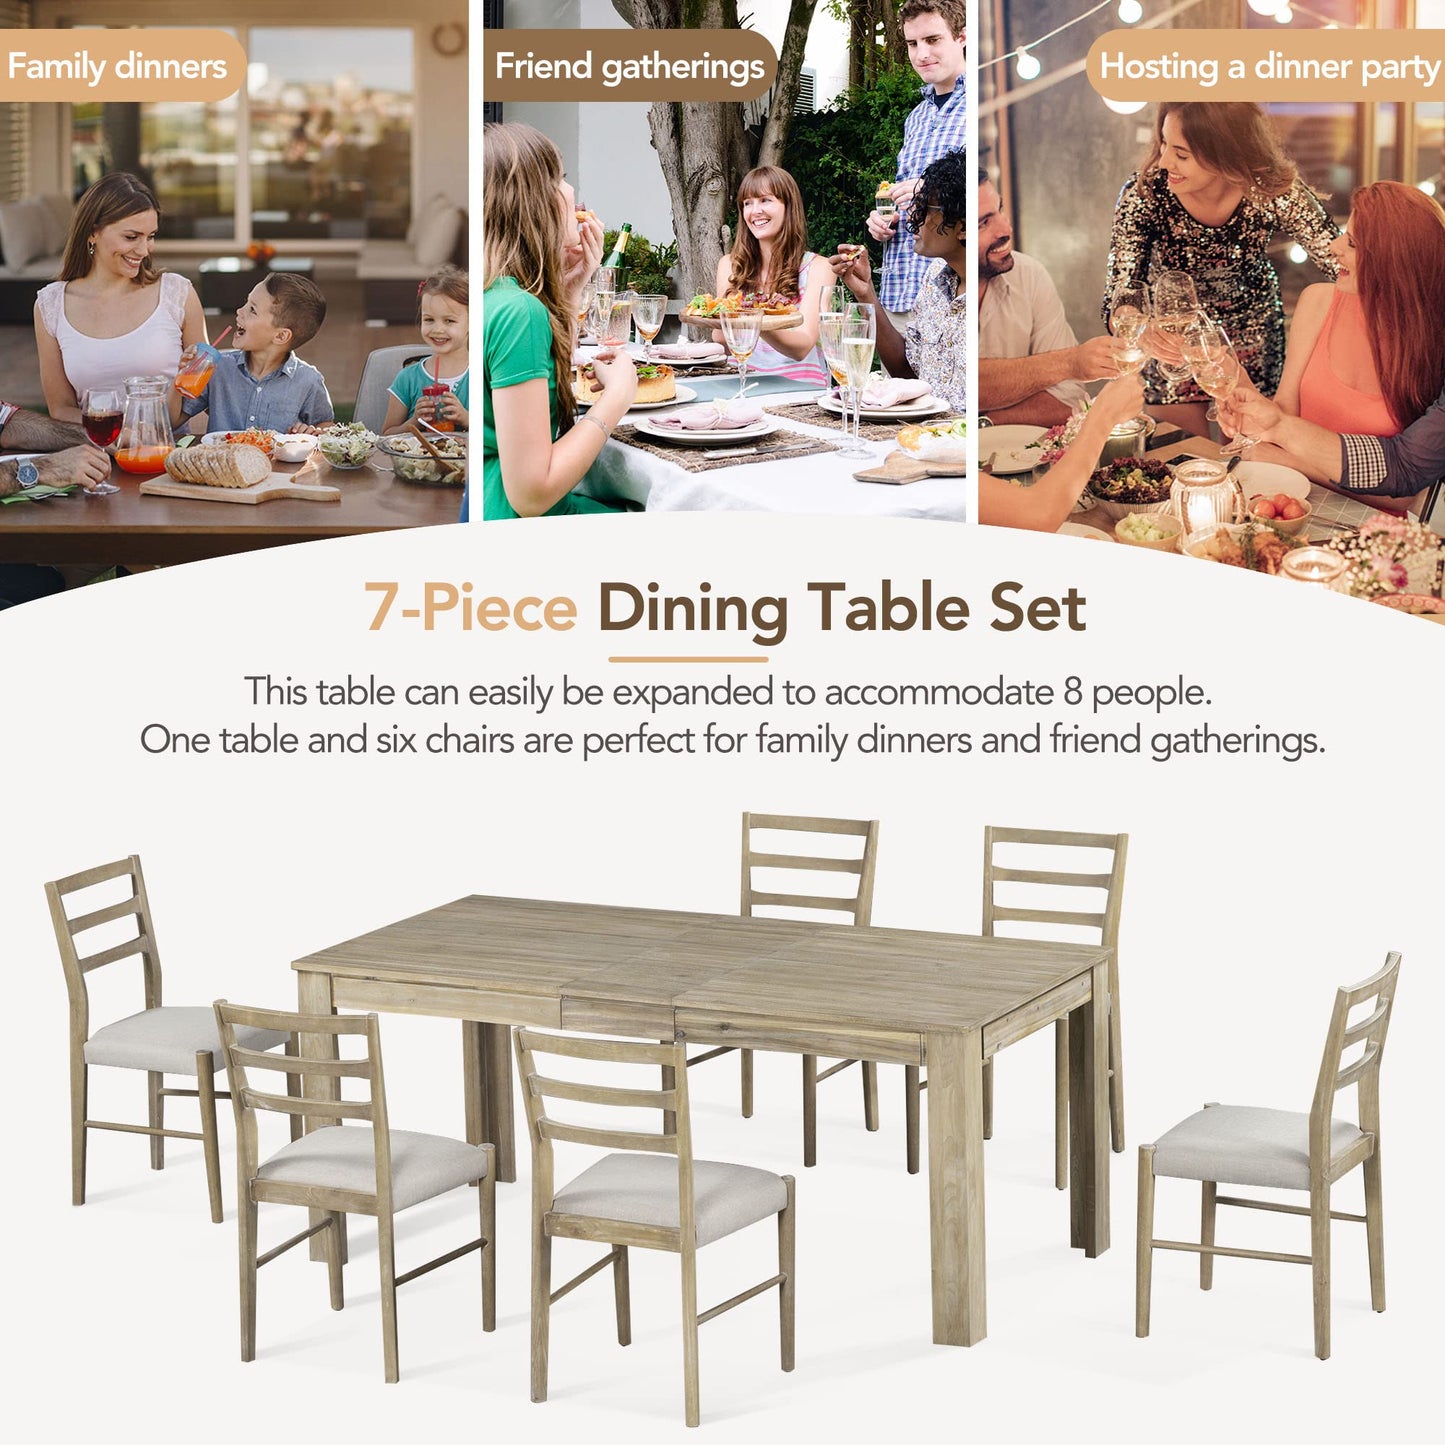 Merax 7-Piece Wooden Dining Table Set, Multifunctional Extendable Tabletop with 12” Leaf and 2 Drawers, 6 Chairs with Soft Cushion, Natural Wood Wash